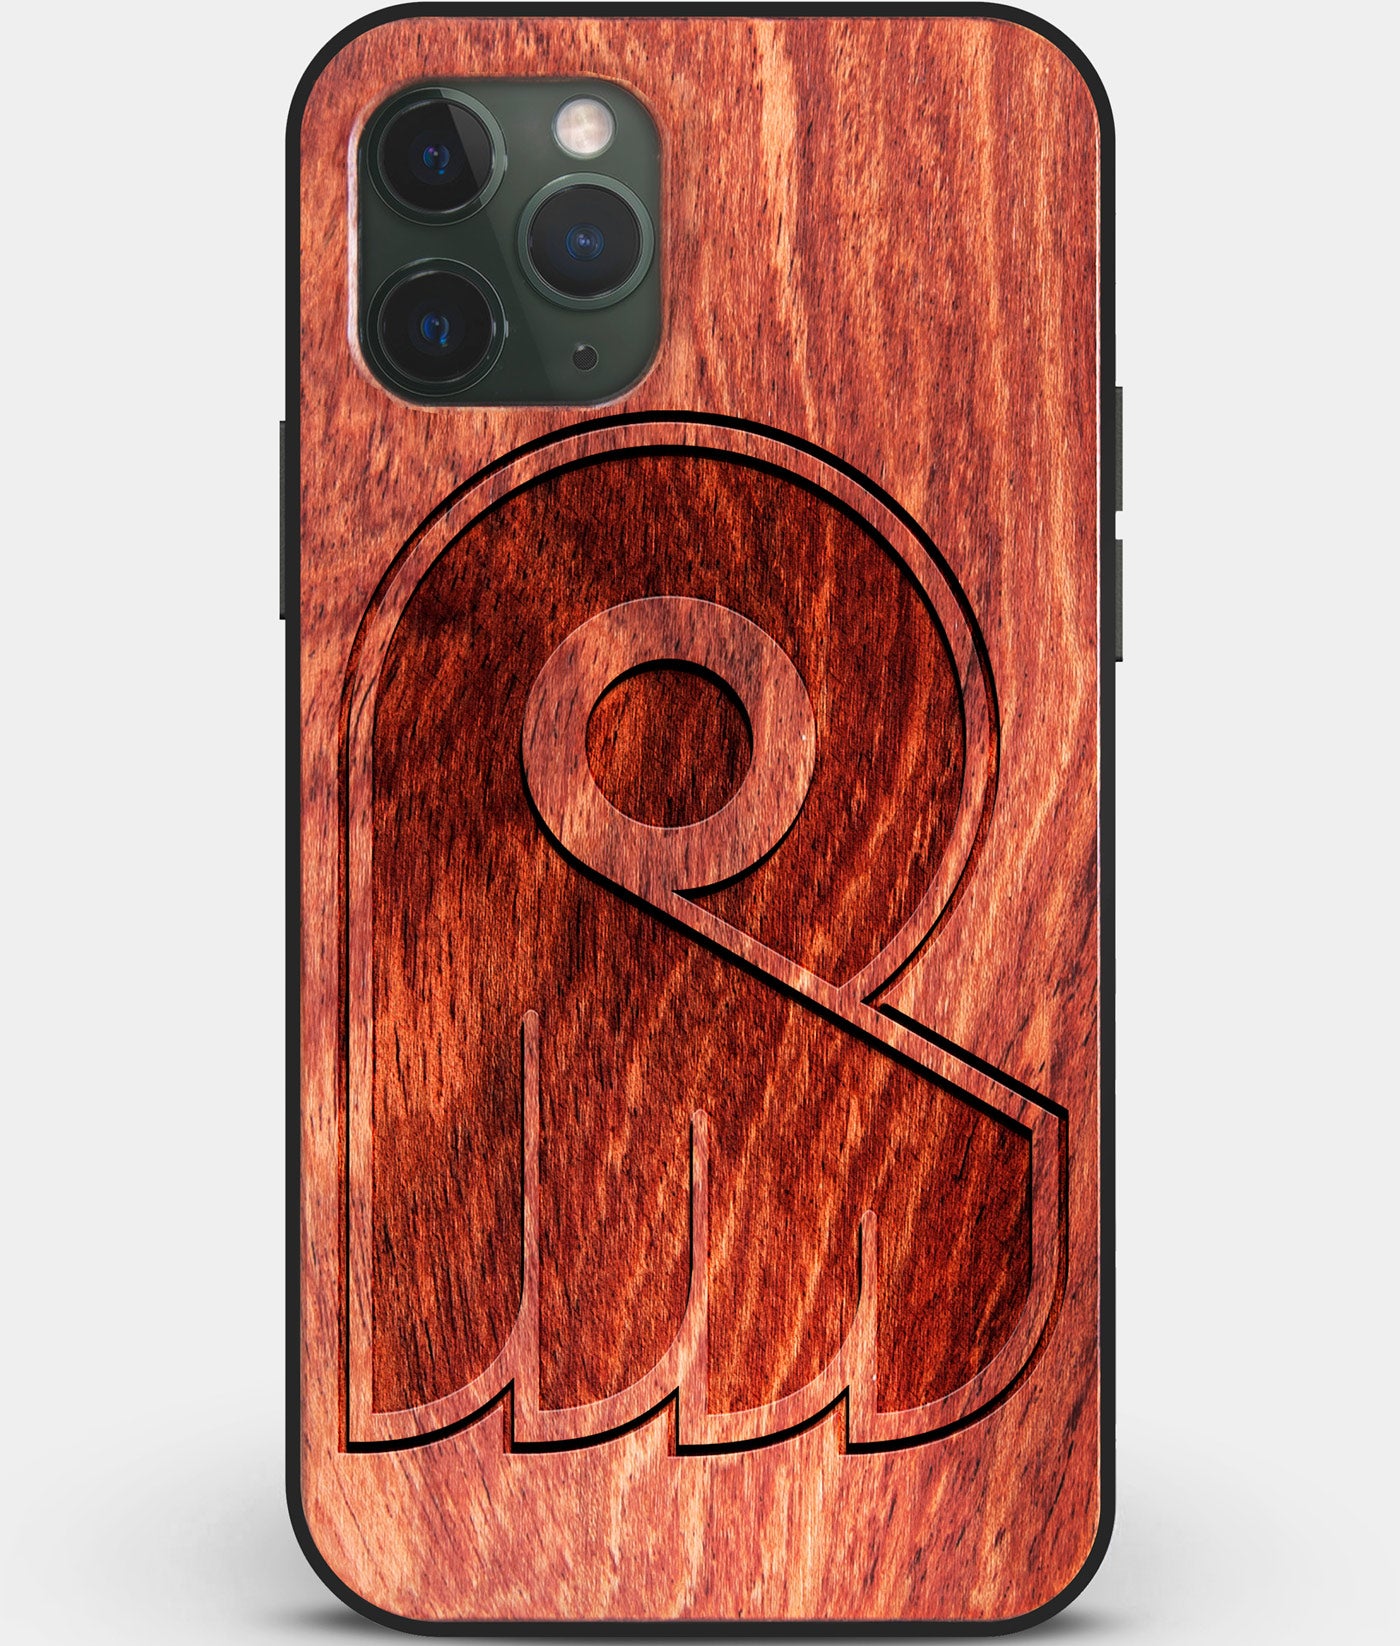 Custom Carved Wood Philadelphia Flyers iPhone 11 Pro Max Case | Personalized Mahogany Wood Philadelphia Flyers Cover, Birthday Gift, Gifts For Him, Monogrammed Gift For Fan | by Engraved In Nature